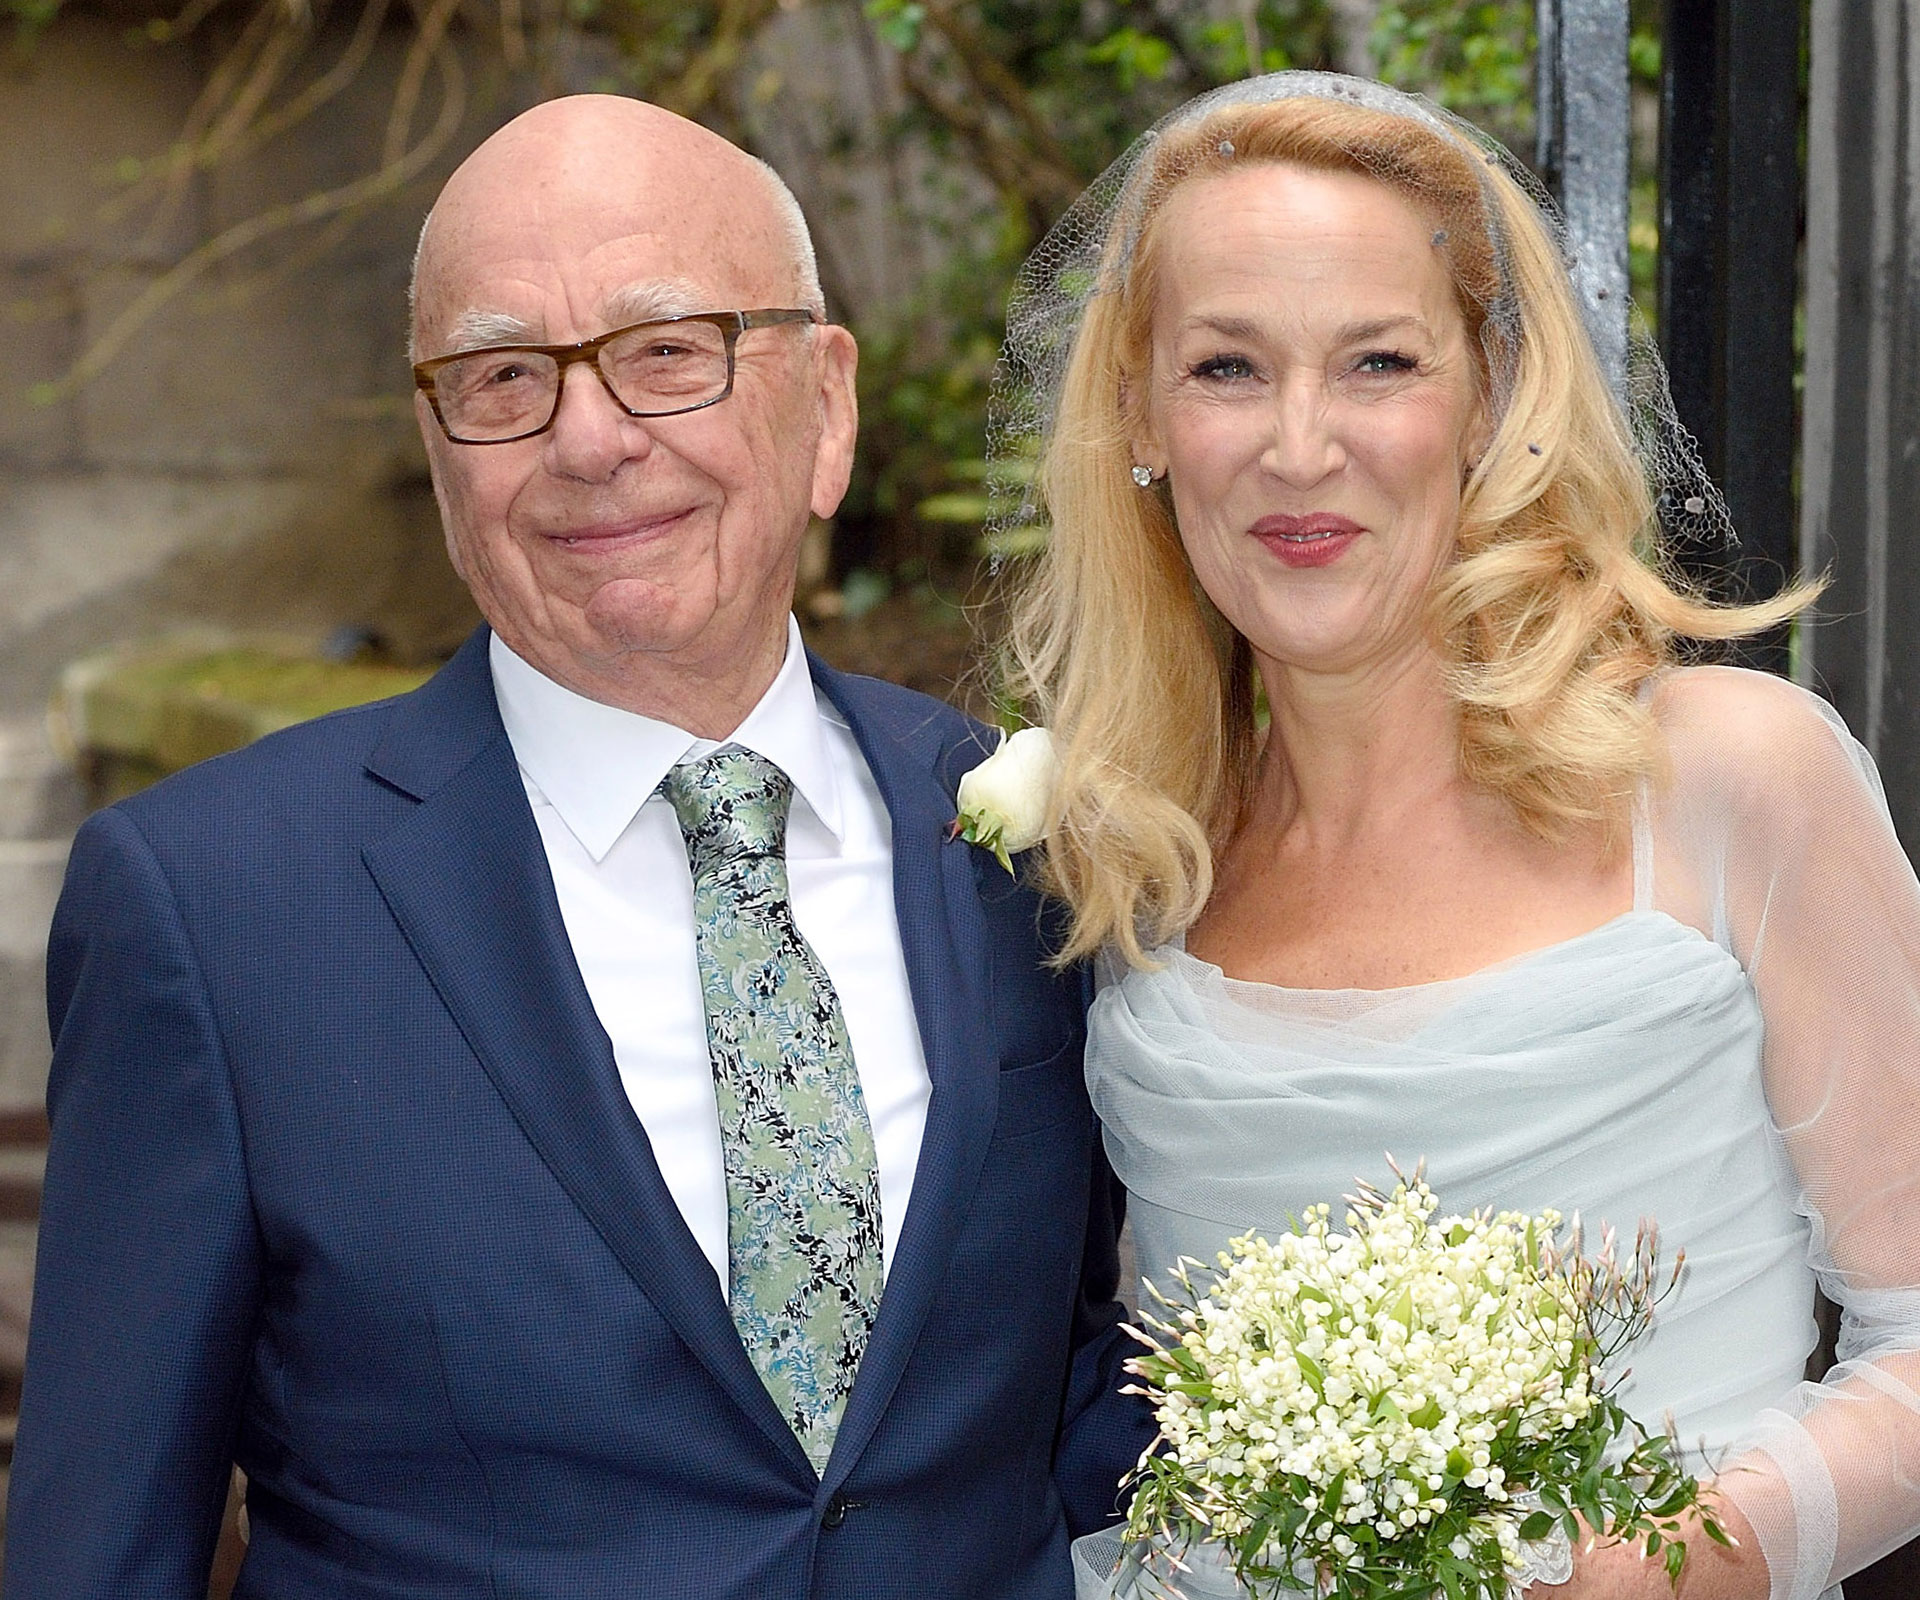 The truth about Rupert Murdoch and Jerry Hall